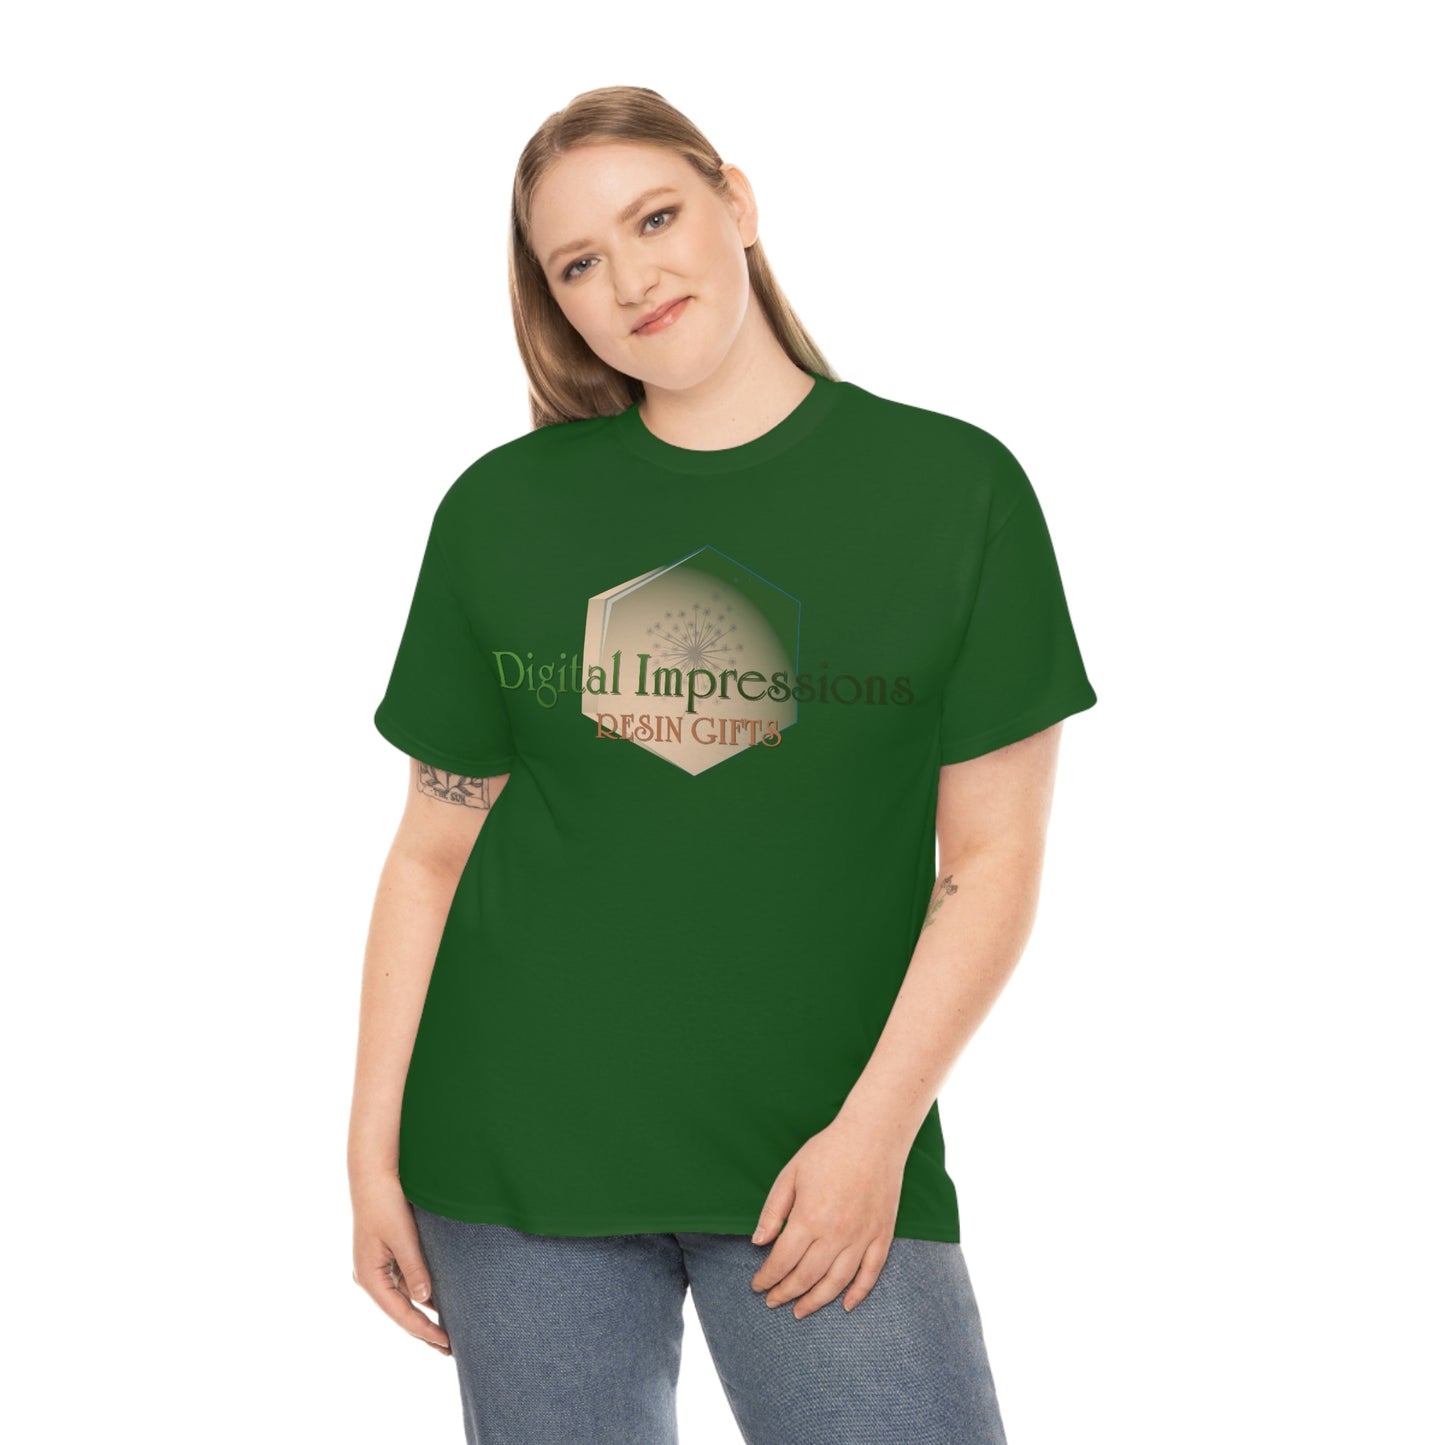 Unisex Heavy Cotton Tee with Resin Gifts Logo